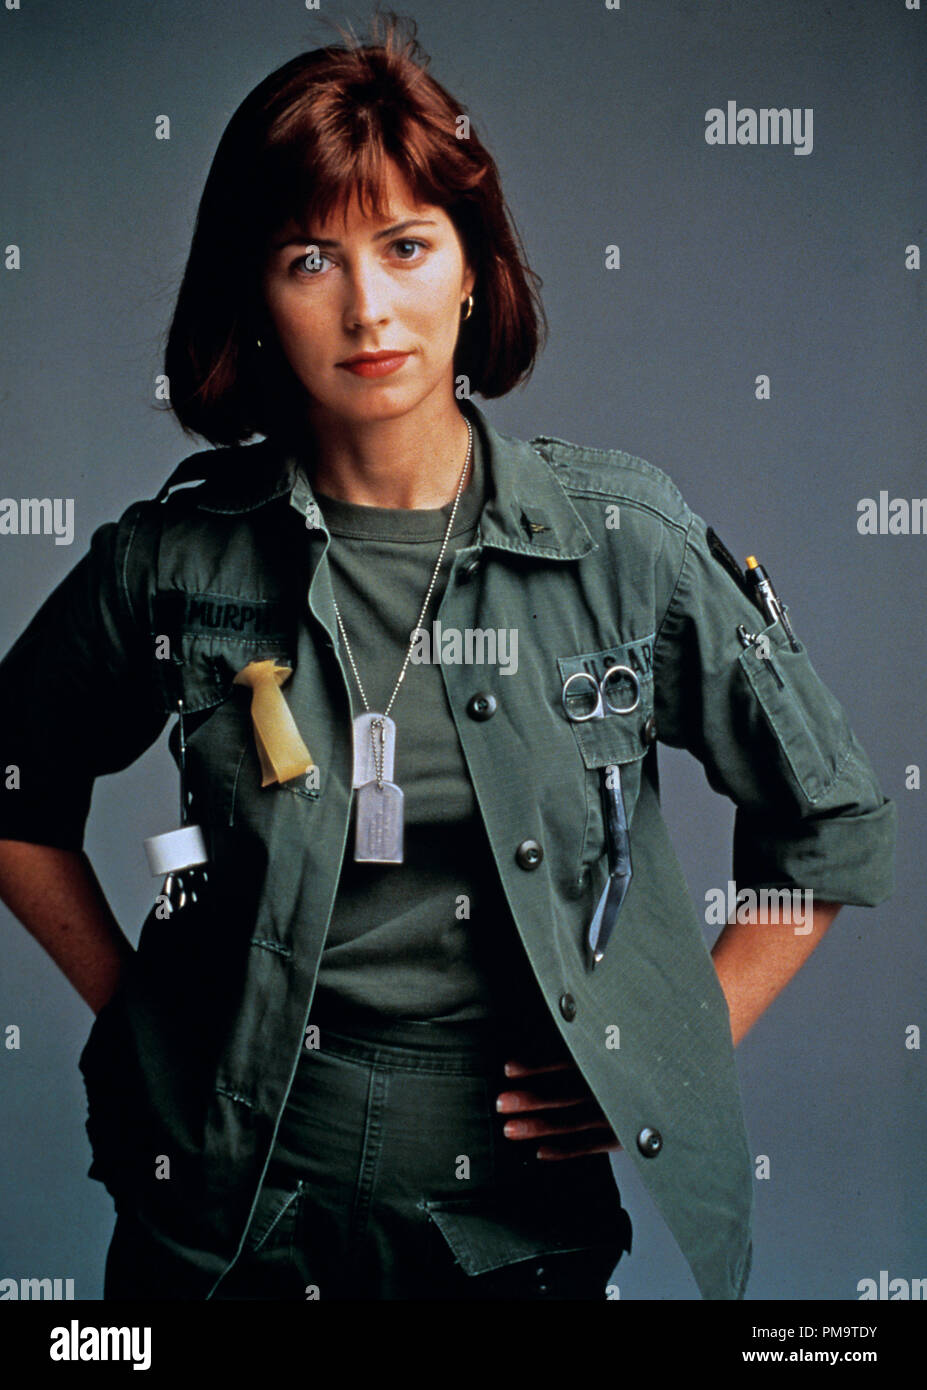 Studio Publicity Still from "China Beach" Dana Delany 1988  All Rights Reserved   File Reference # 31694282THA  For Editorial Use Only Stock Photo